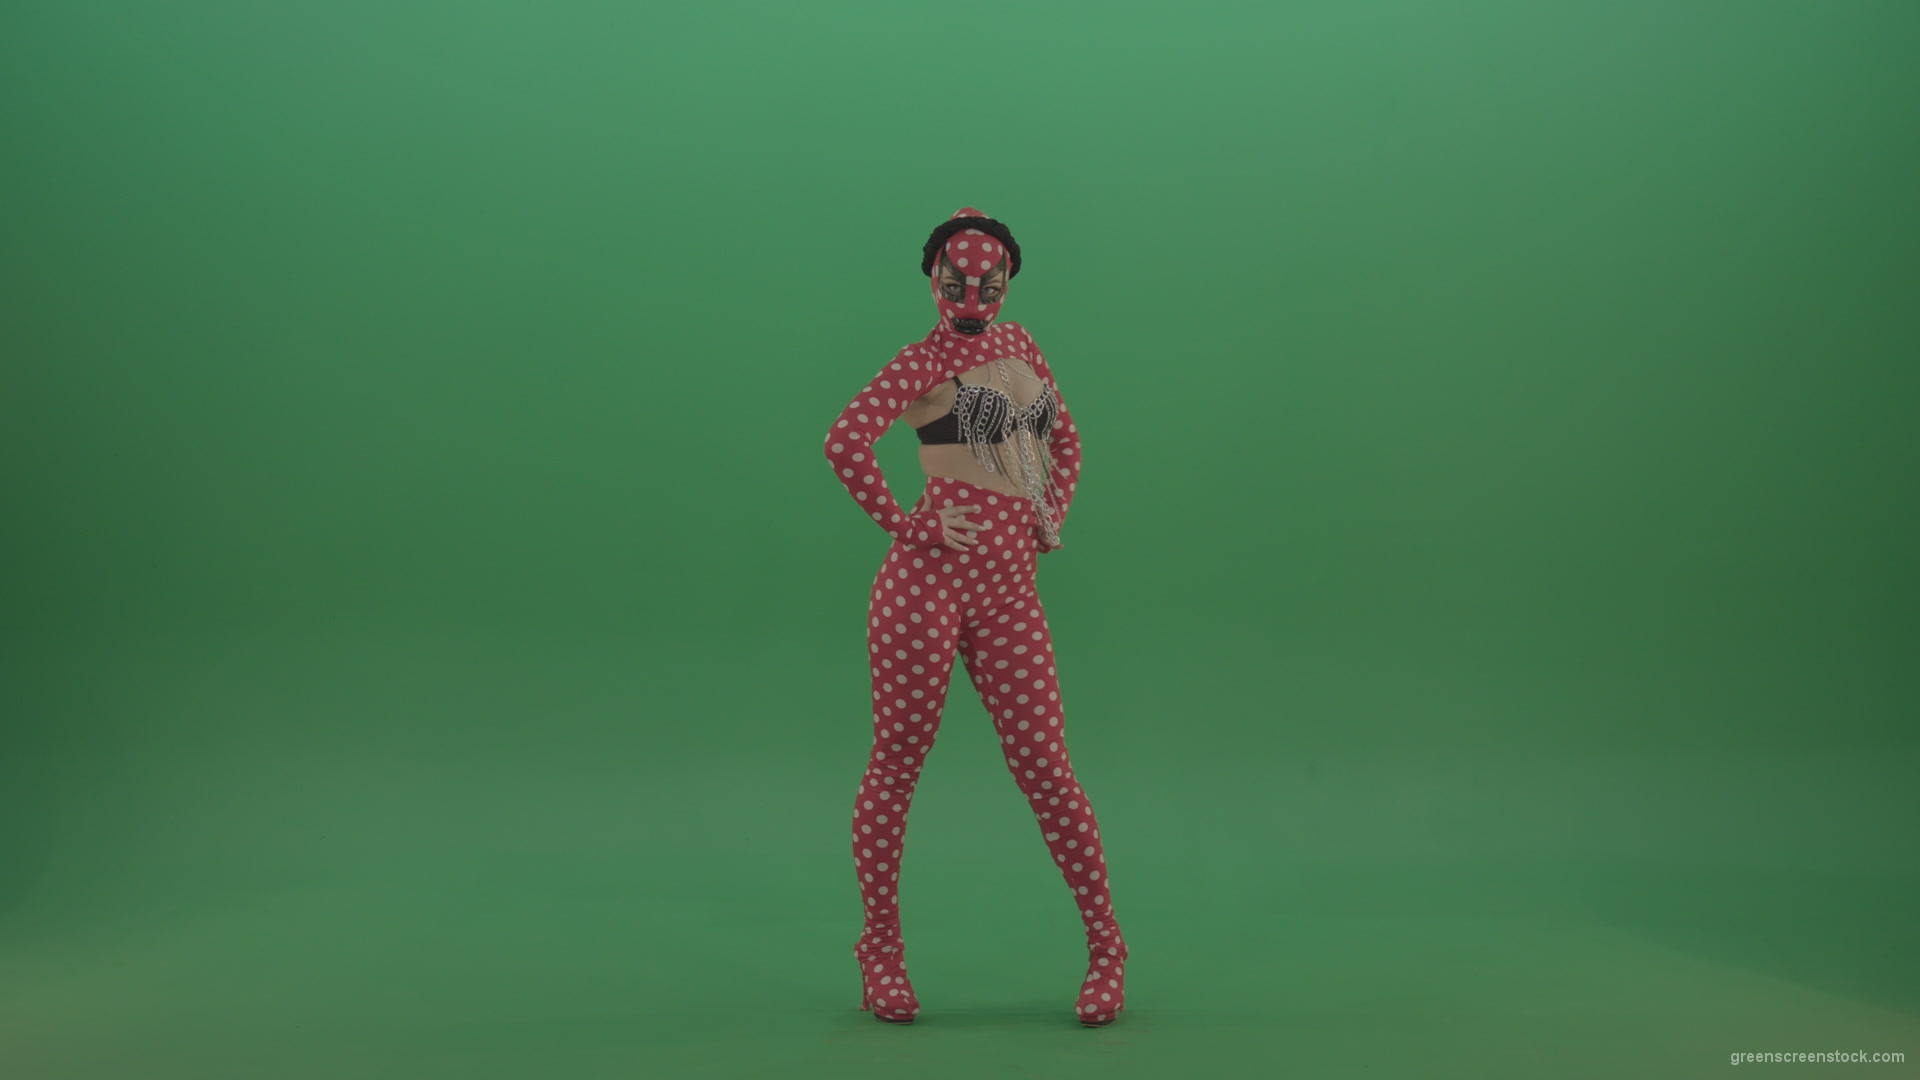 Girl-in-red-strip-dance-costume-in-front-view-posing-isolated-on-green-screen_006 Green Screen Stock